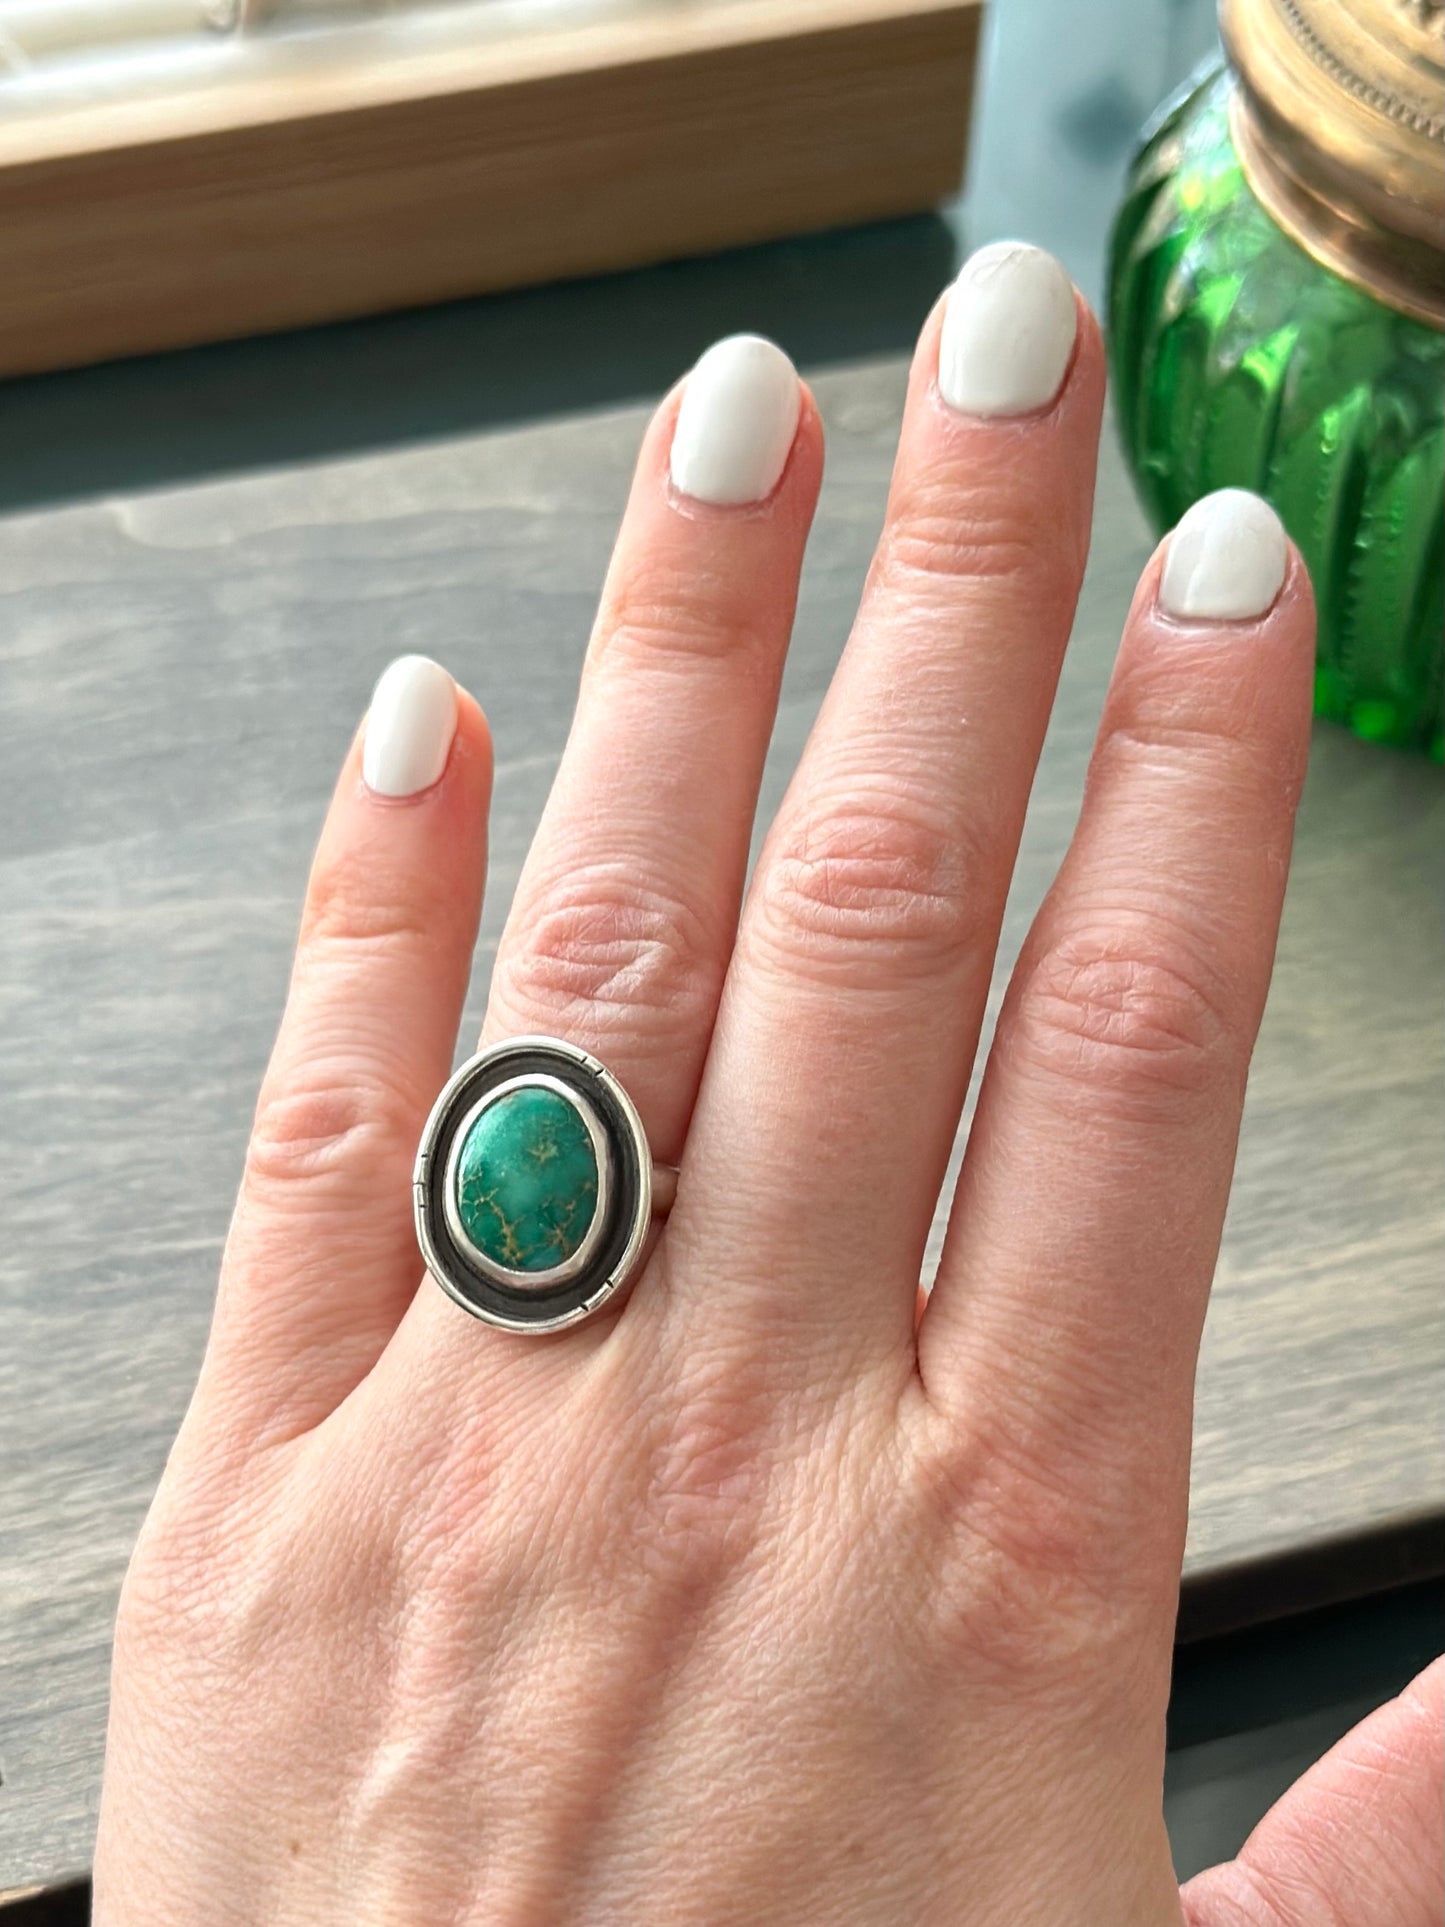 Emerald Valley Turquoise Shadowbox Ring in size 7.75